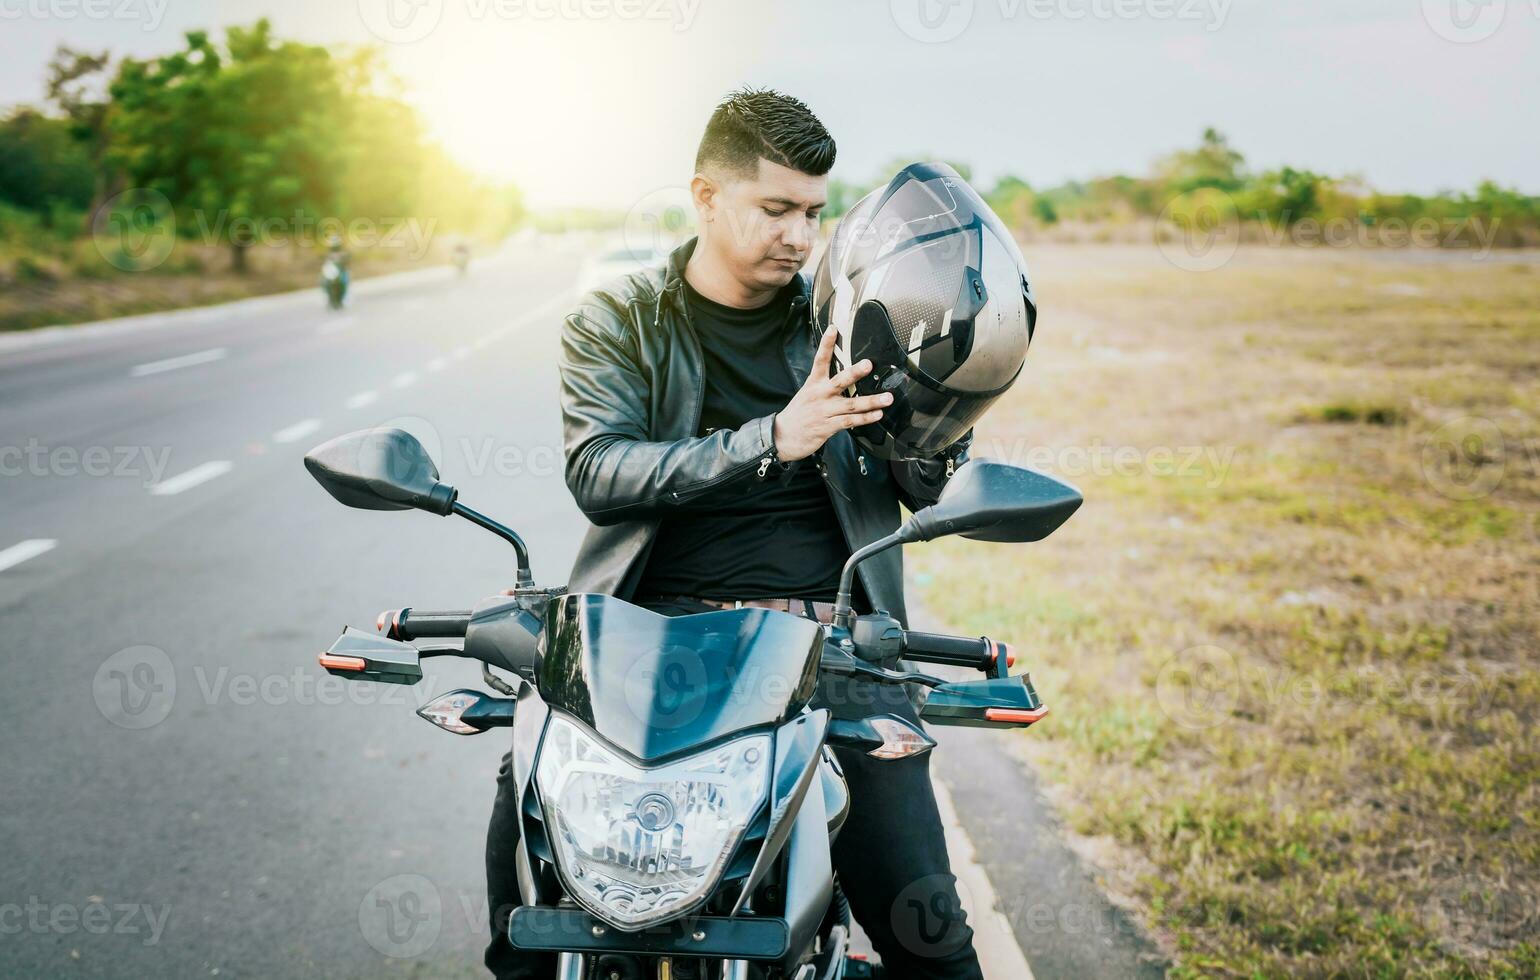 Young motorcyclist man putting on safety helmet outdoors. Male biker on motorcycle putting on helmet. Biker motorcycle safety concept photo